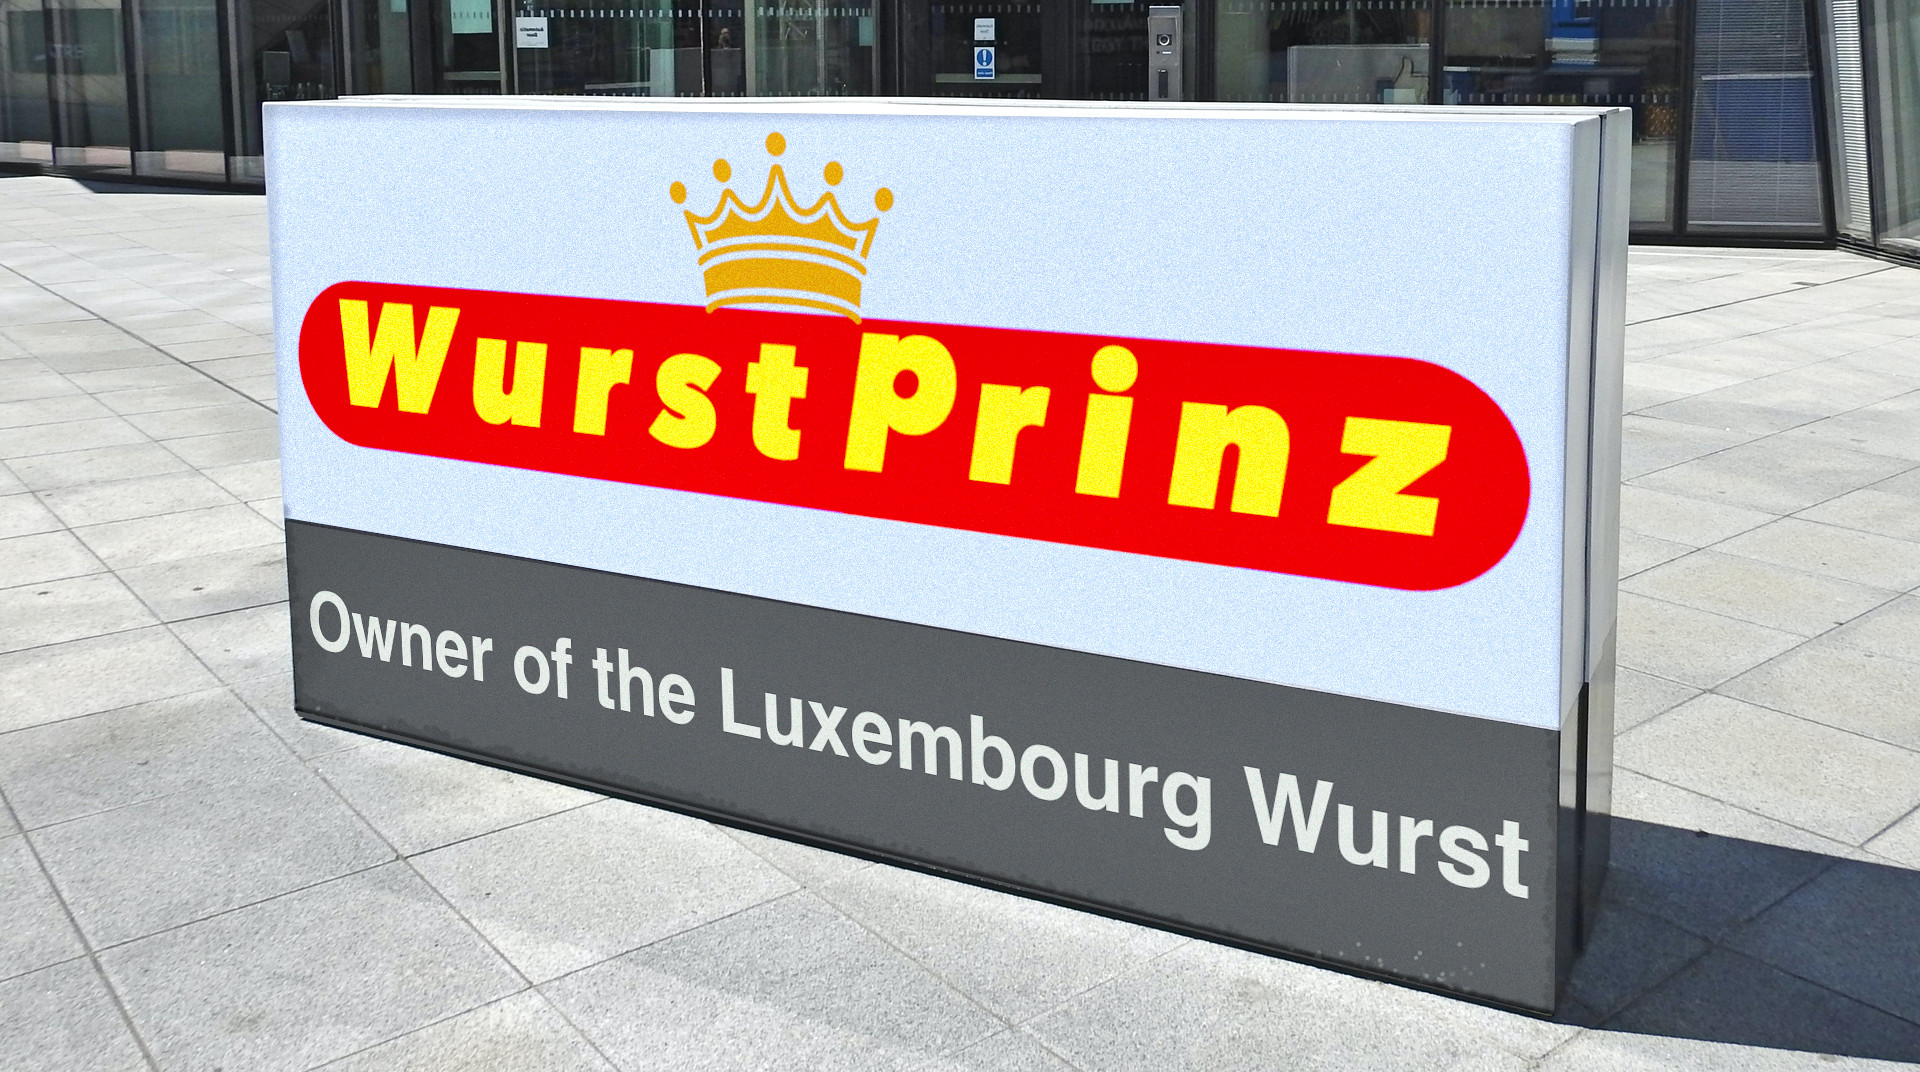 Luxembourg Wurst sold to German sausage company